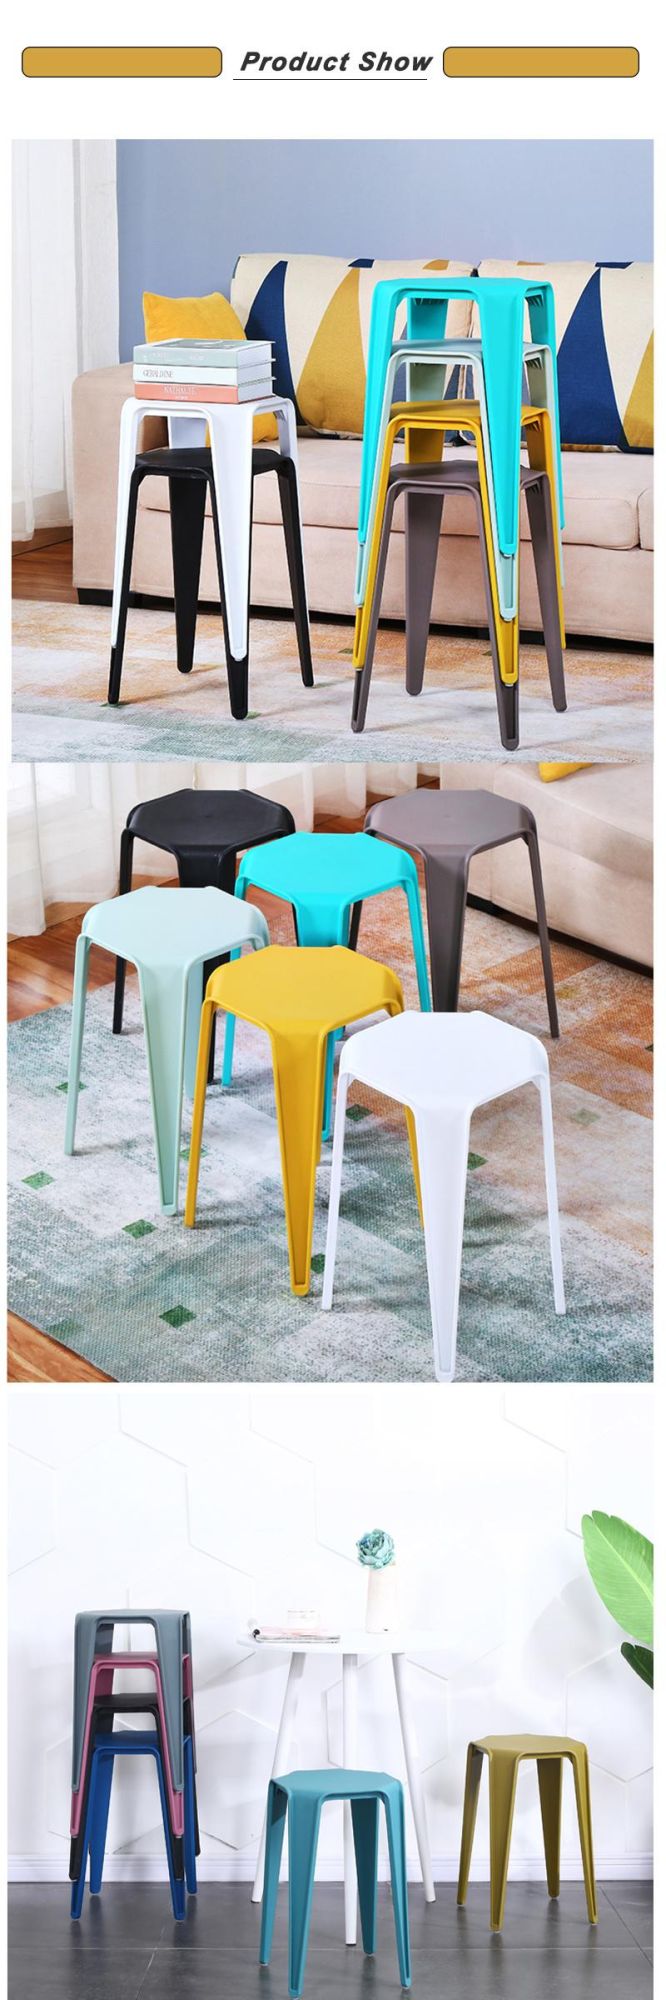 Wholesale Home Kitchen Room Furniture Stacking Plastic Stool Chair for Living Room